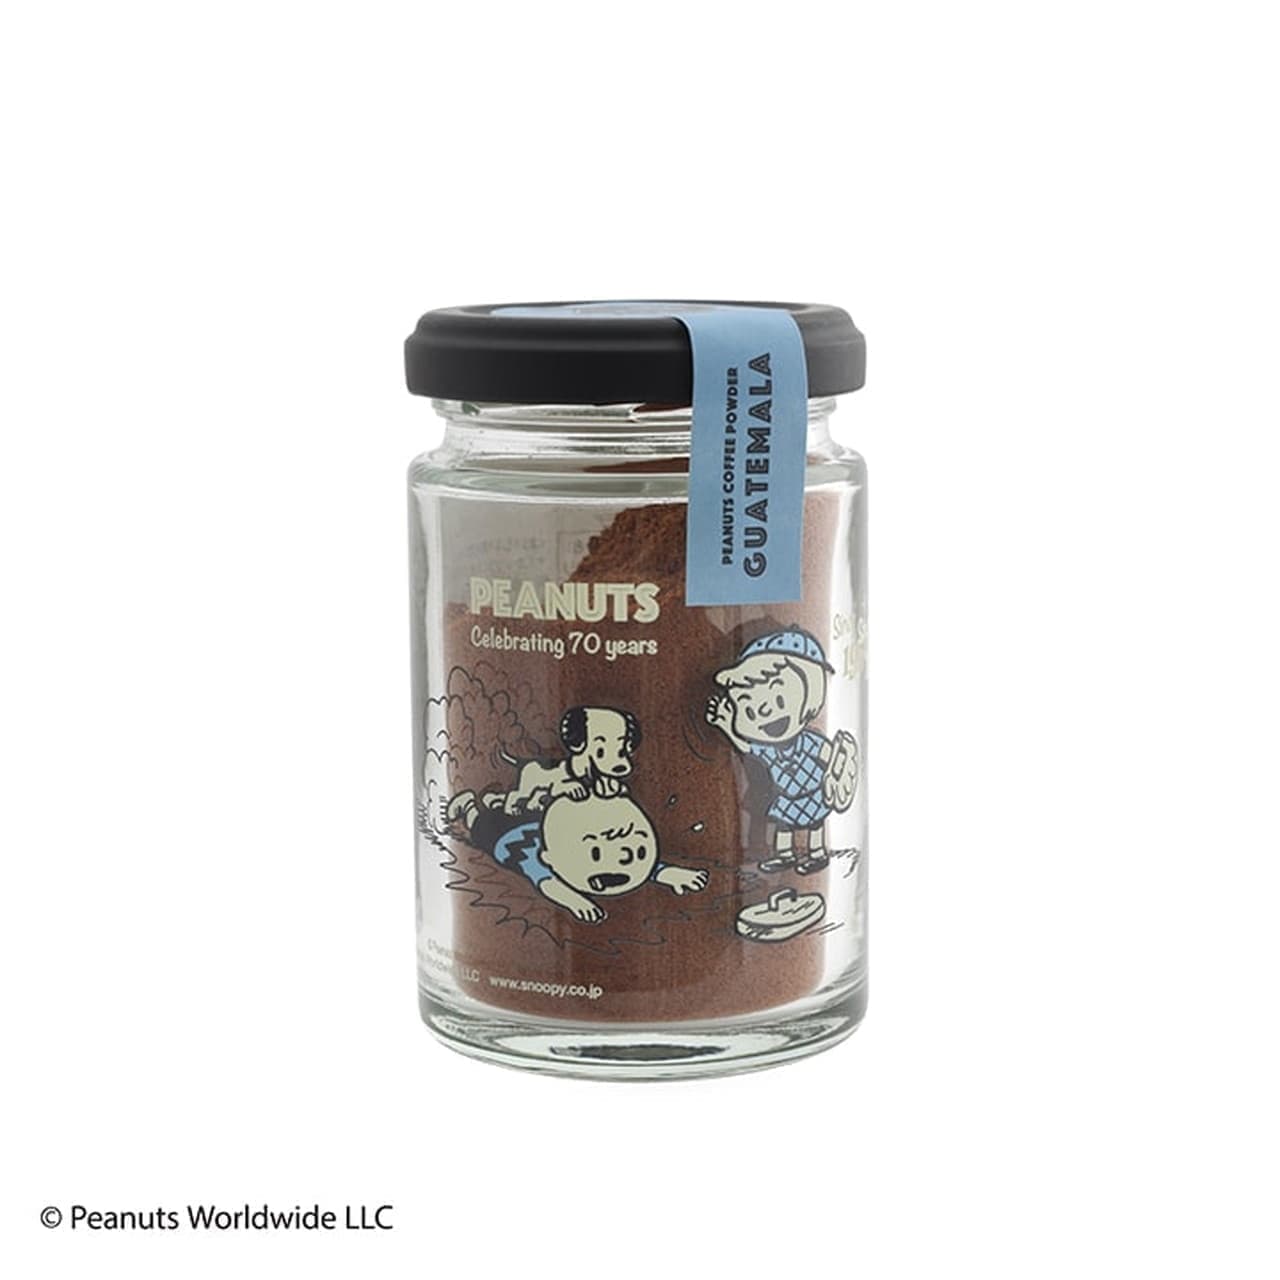 New product with vintage design in Snoopy coffee series